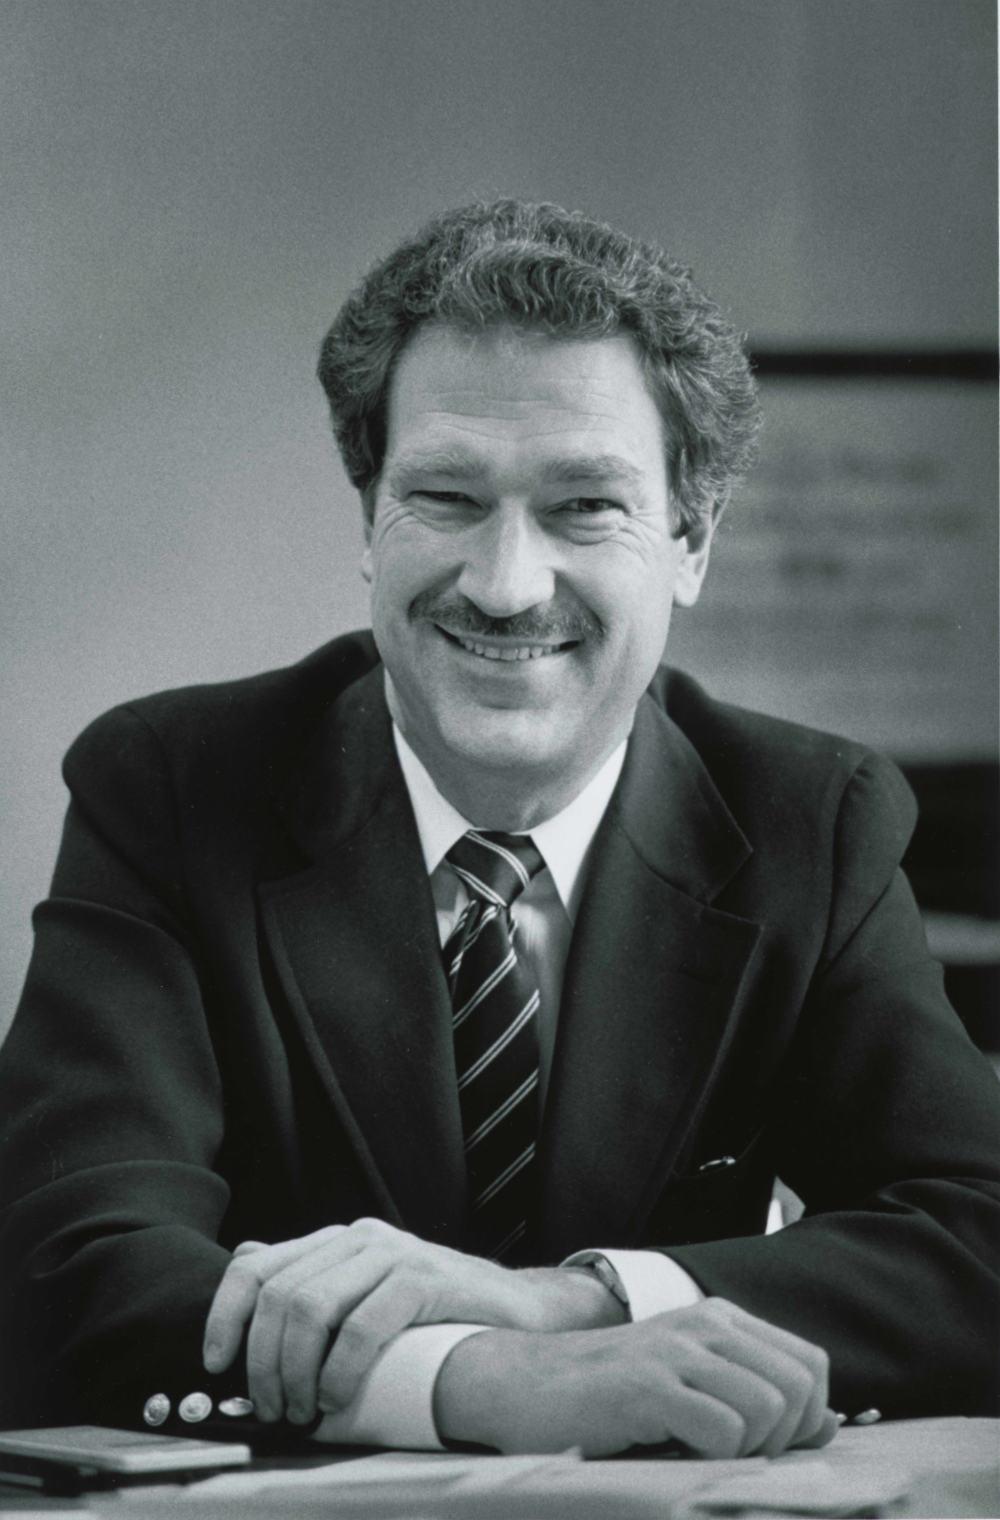 Vertical black-and-white photo of Michael Jensen in a suit with his arms folded on the table in front of him looking at the camera and smiling.